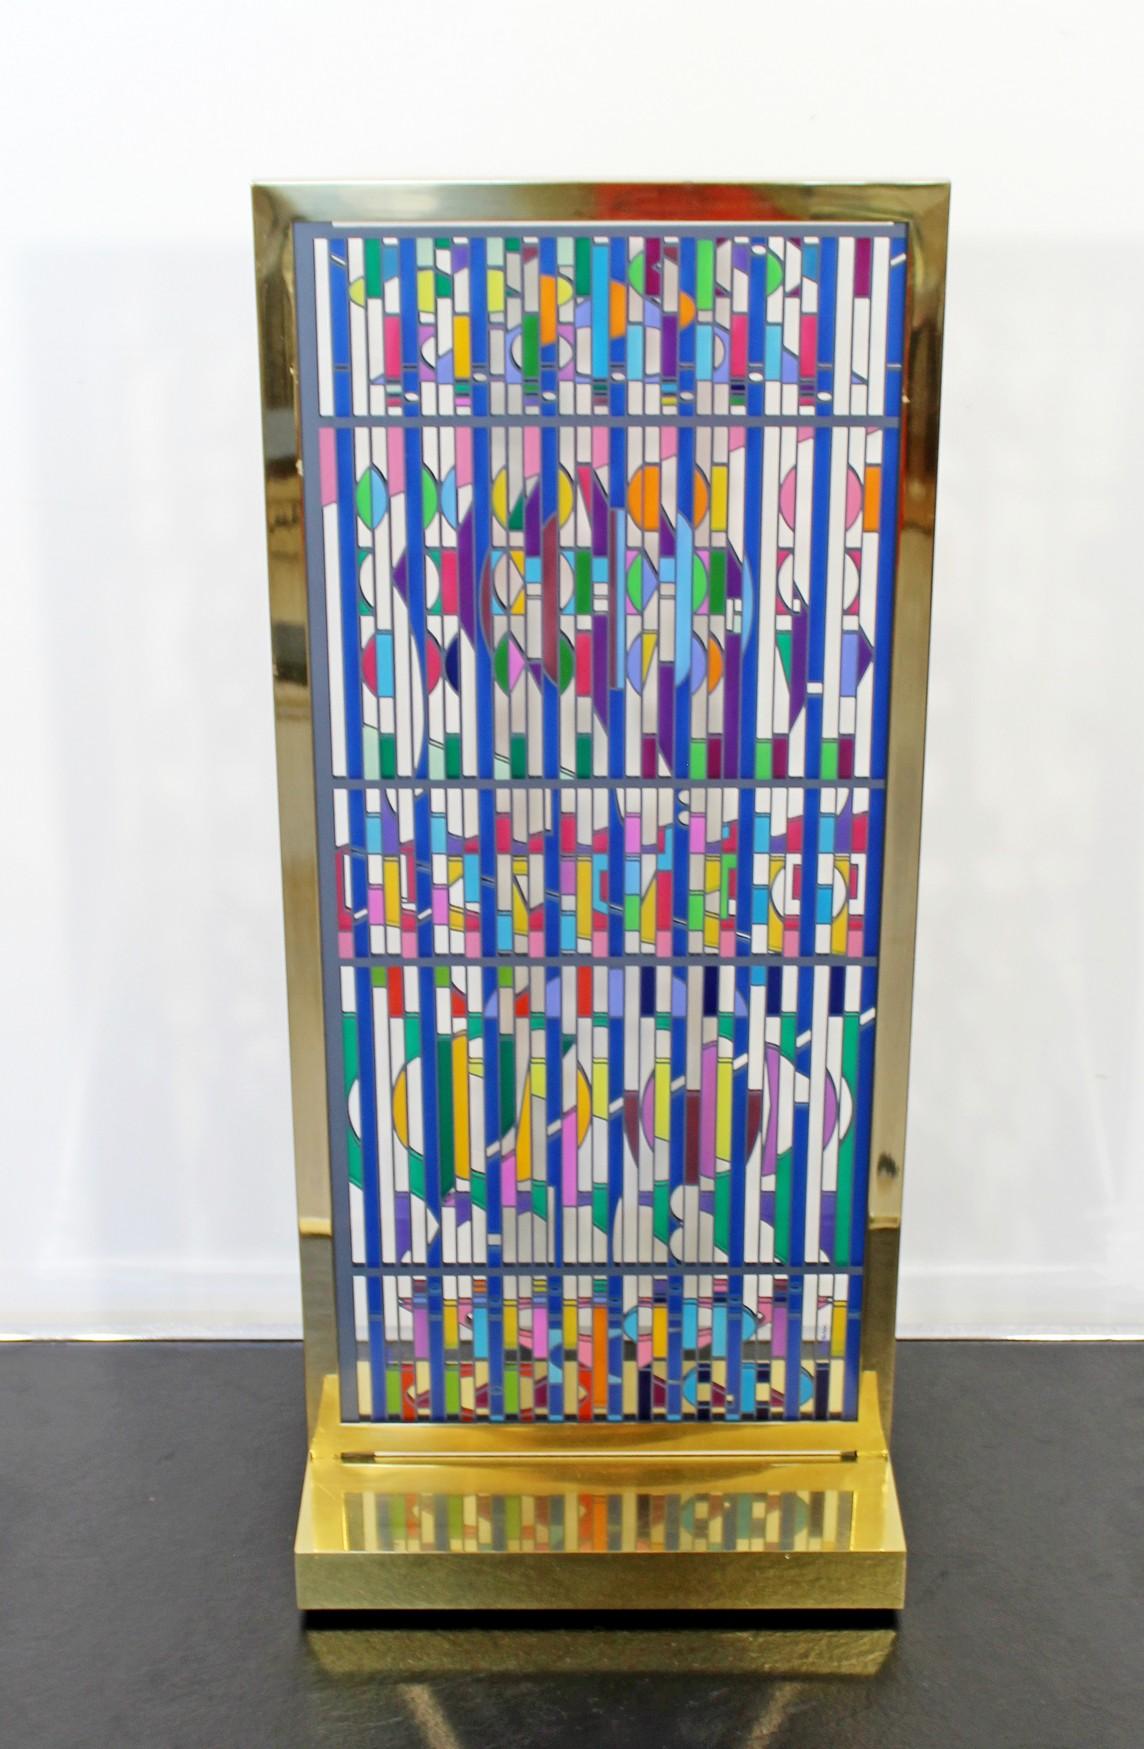 For your consideration is a silkscreen that was printed on movable plexi-glass, hand signed and numbered 81/99 by Yaacov Agam. It is hanging in a gilded brass frame and base Table sculpture. This piece measures 28